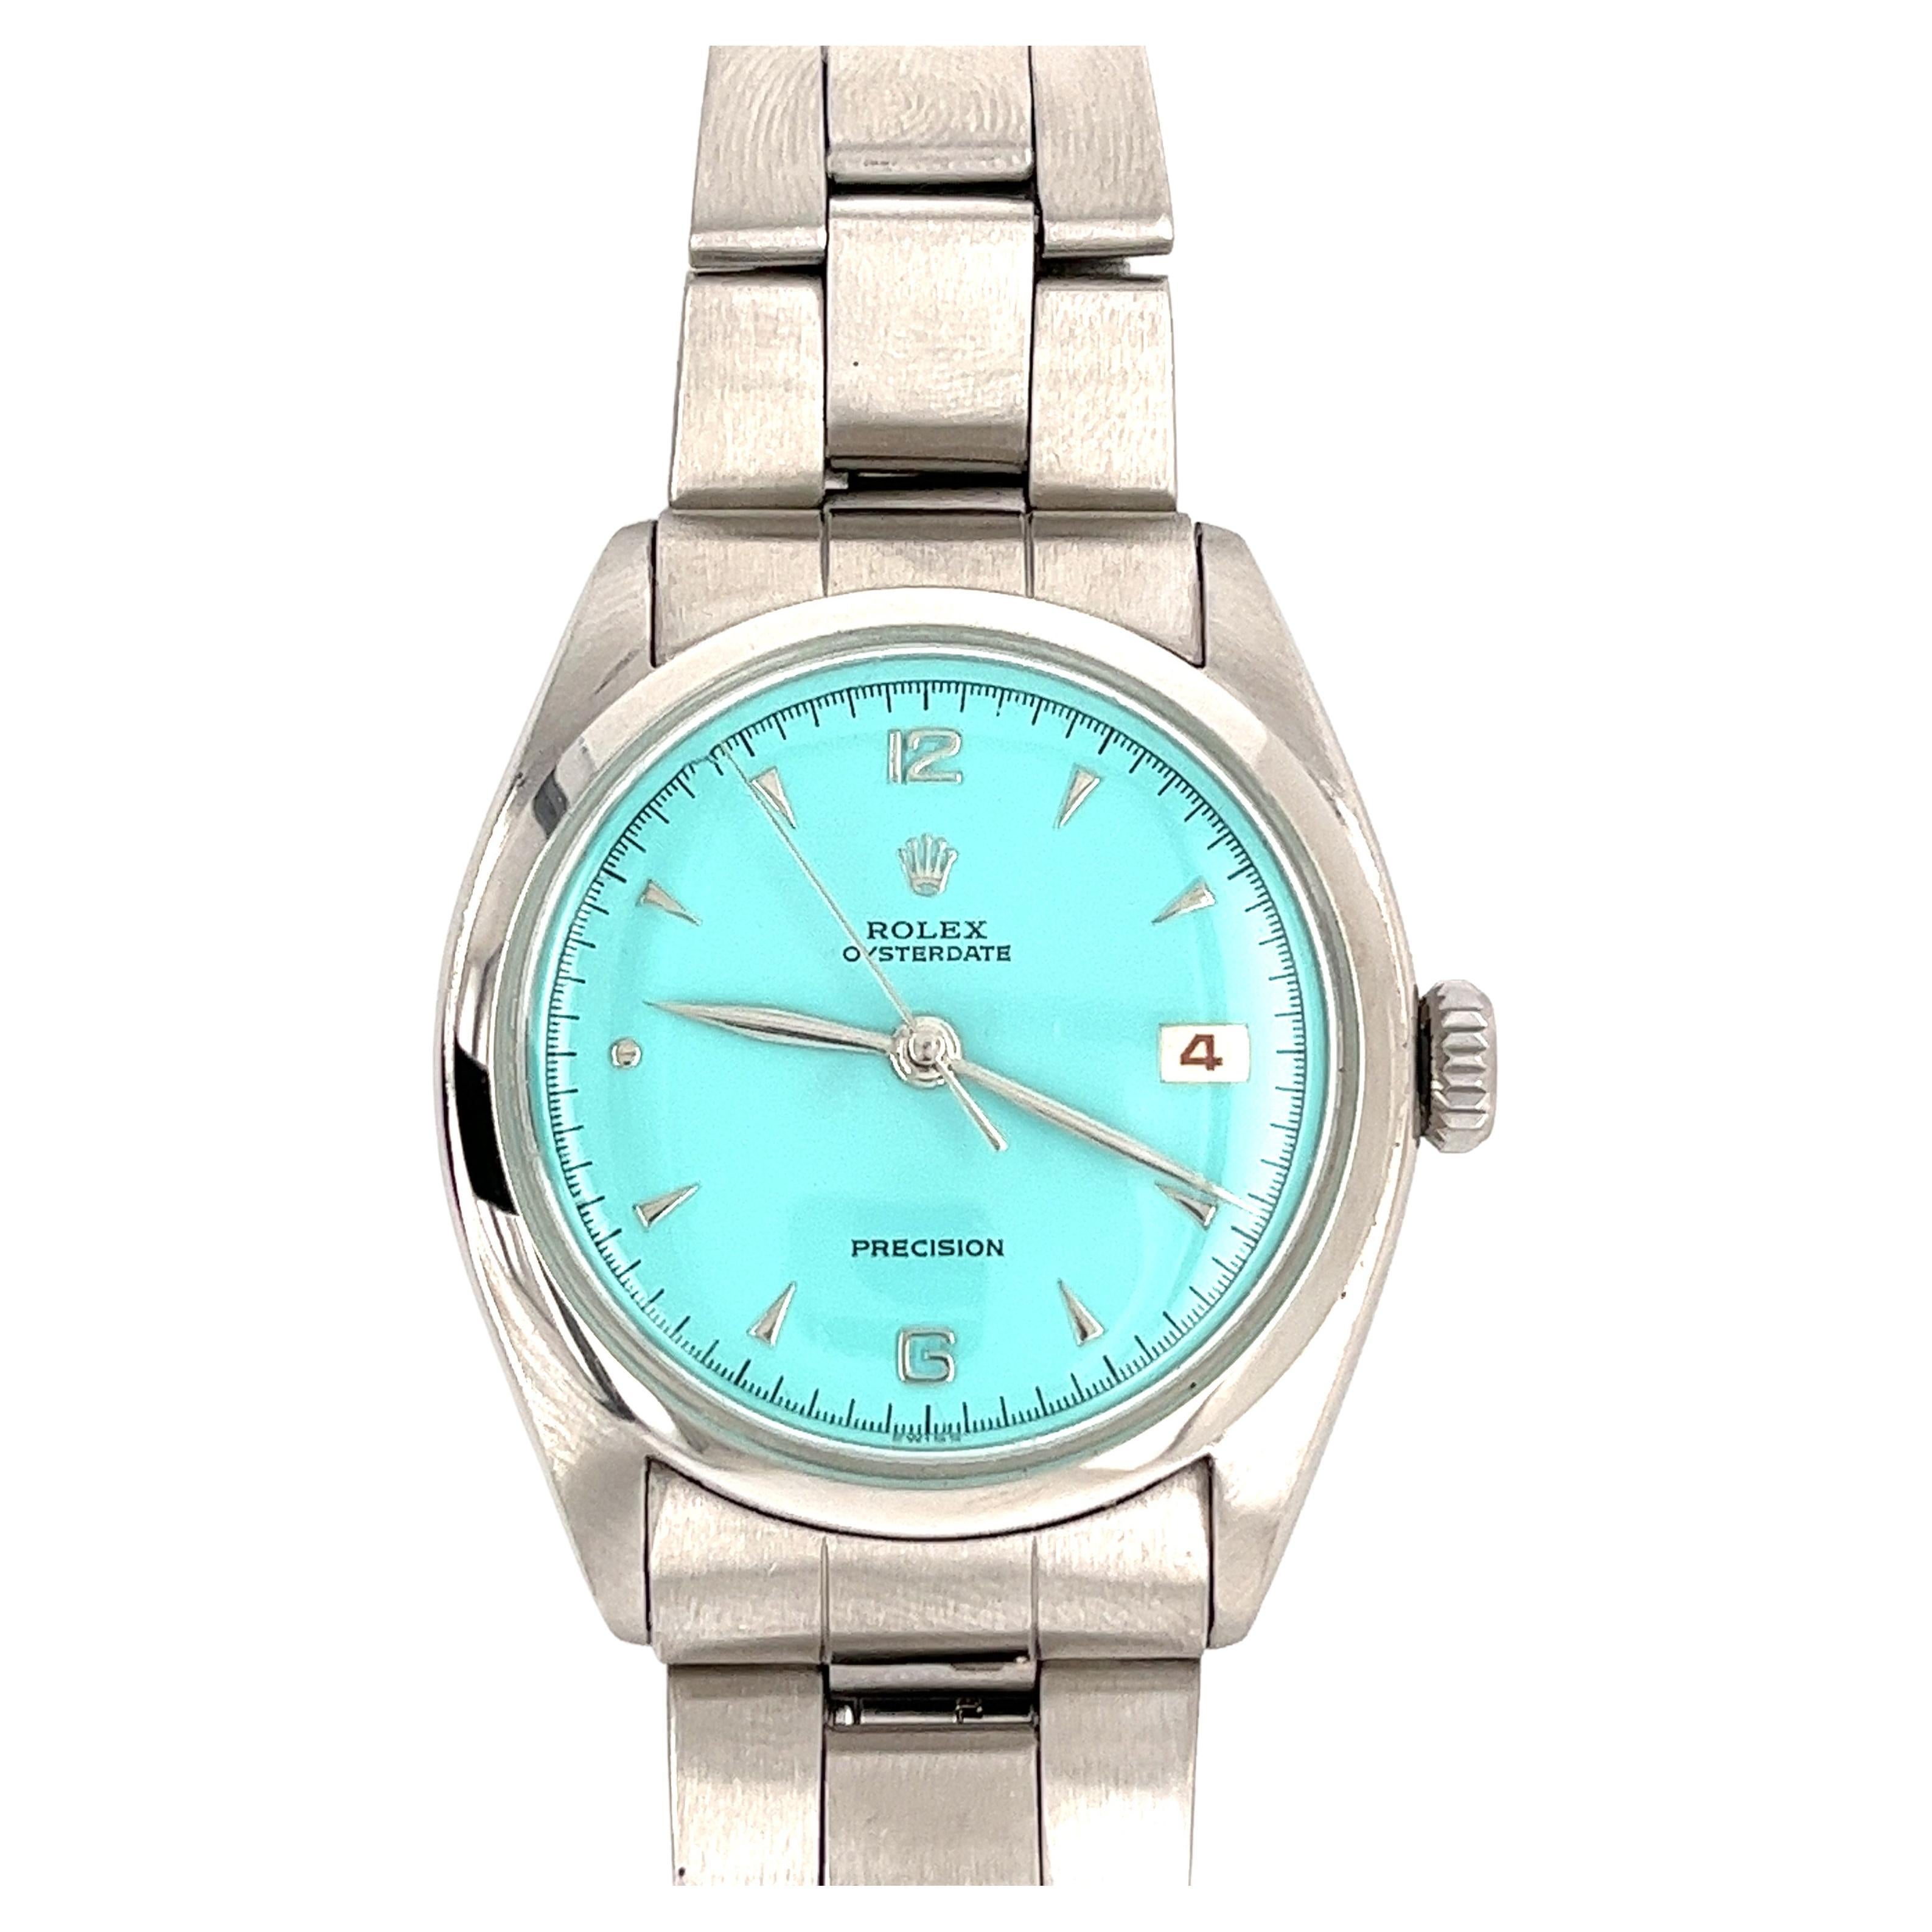 Rolex Tiffany Blue Oyster Date Precision Vintage 1963 For Sale at 1stDibs |  tiffany blue rolex, casio vintage tiffany blue, rolex with tiffany blue face